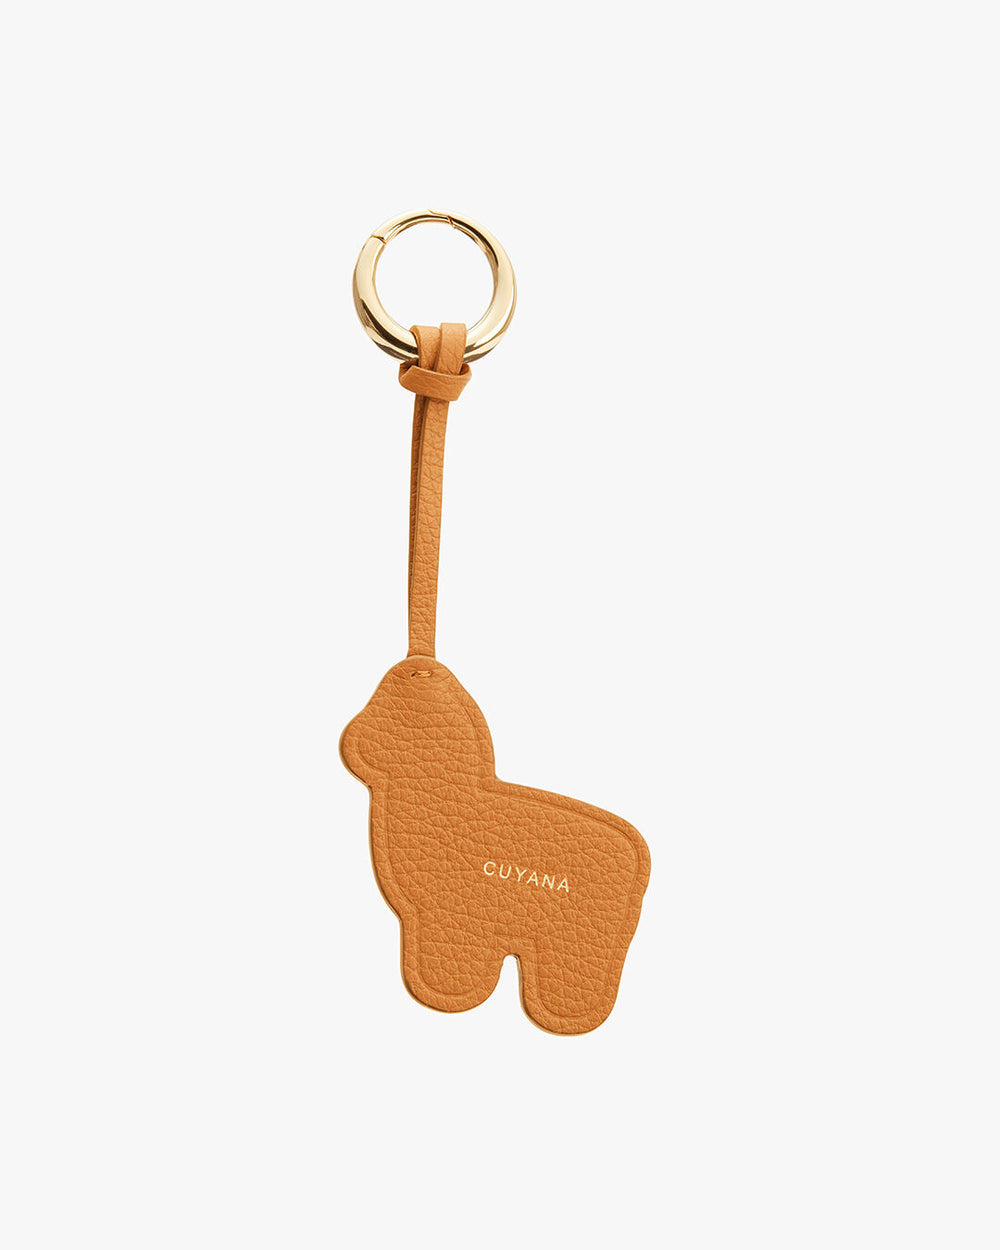 Keychain in the shape of an alpaca with a ring and attached strap.